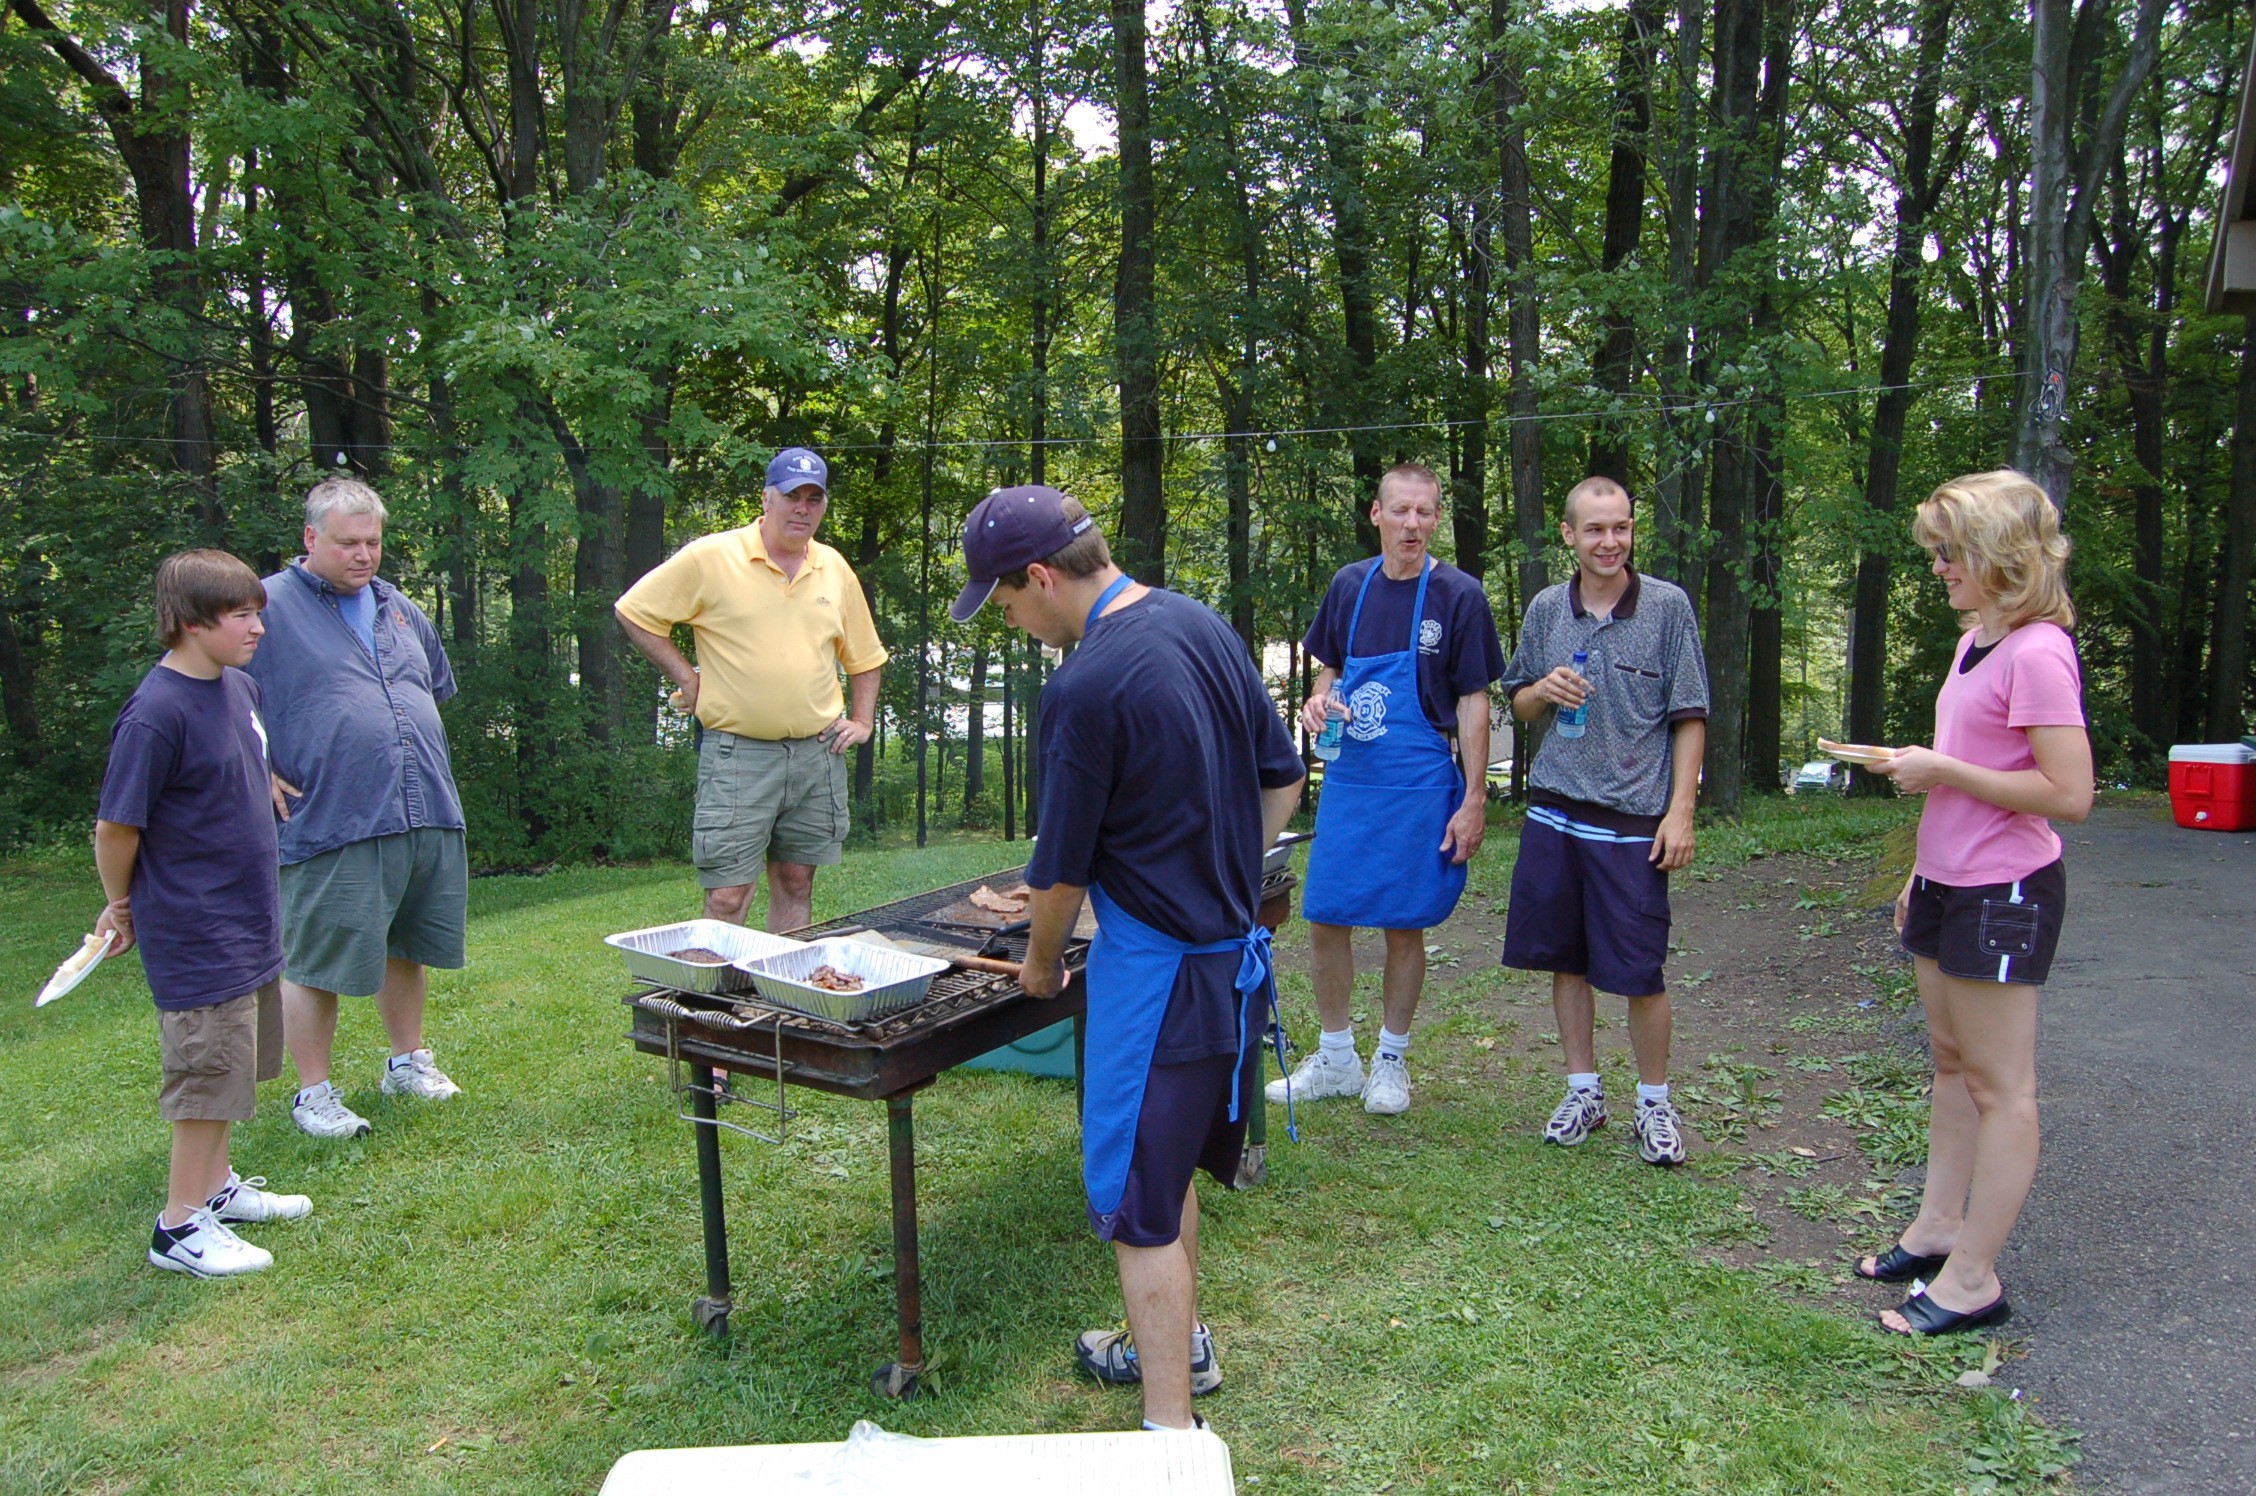 07-30-06  Other - Company Picnic